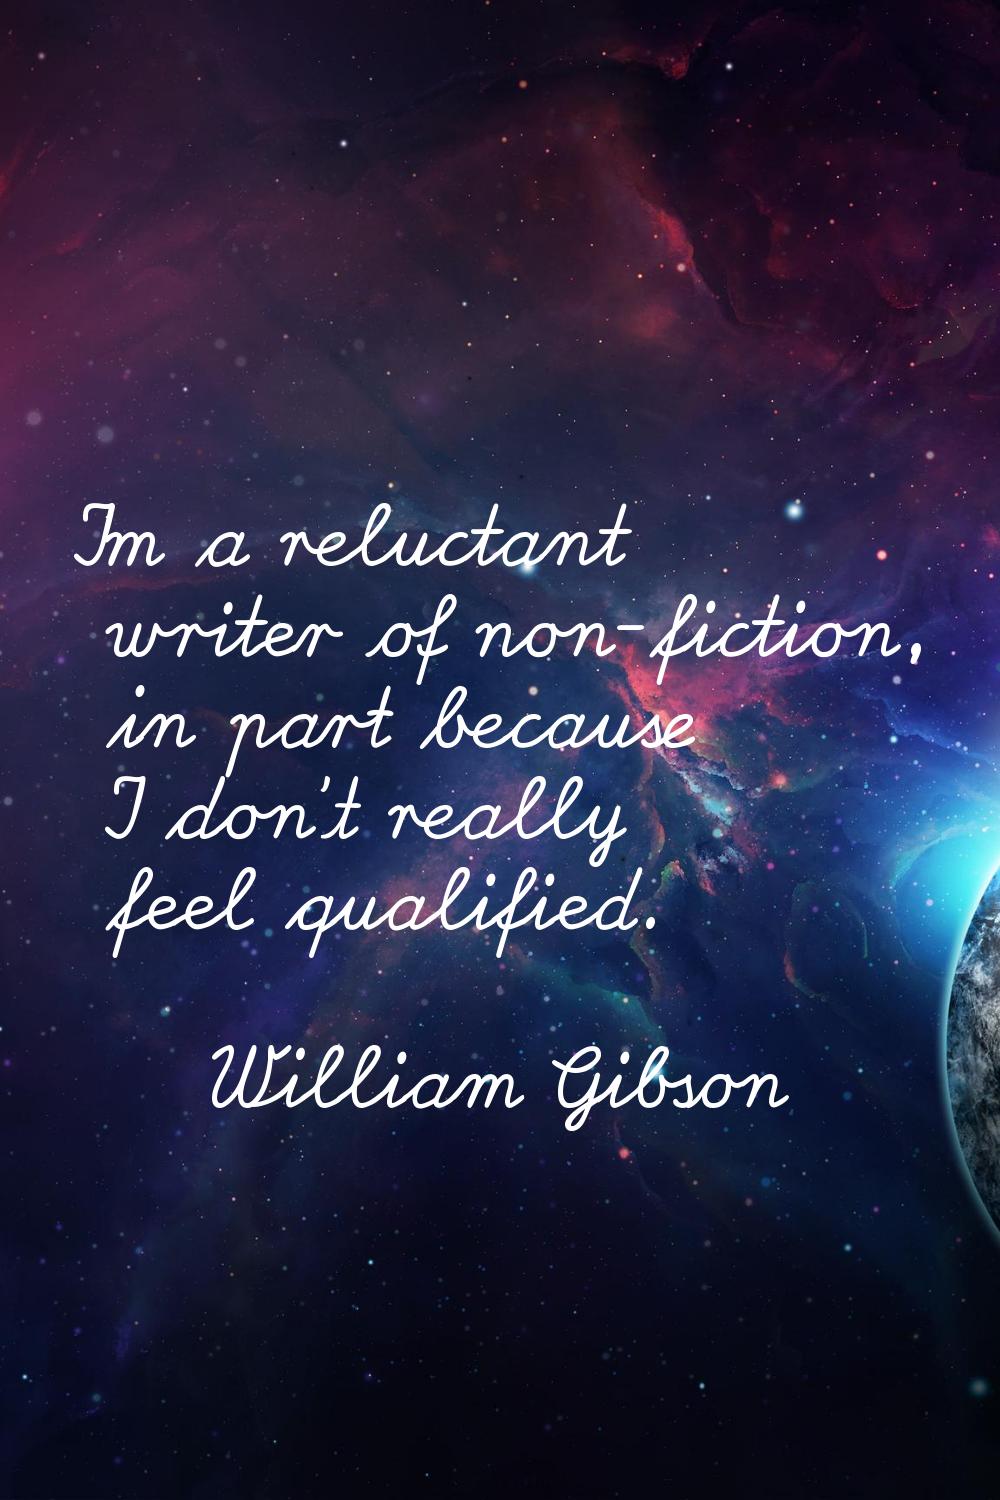 I'm a reluctant writer of non-fiction, in part because I don't really feel qualified.